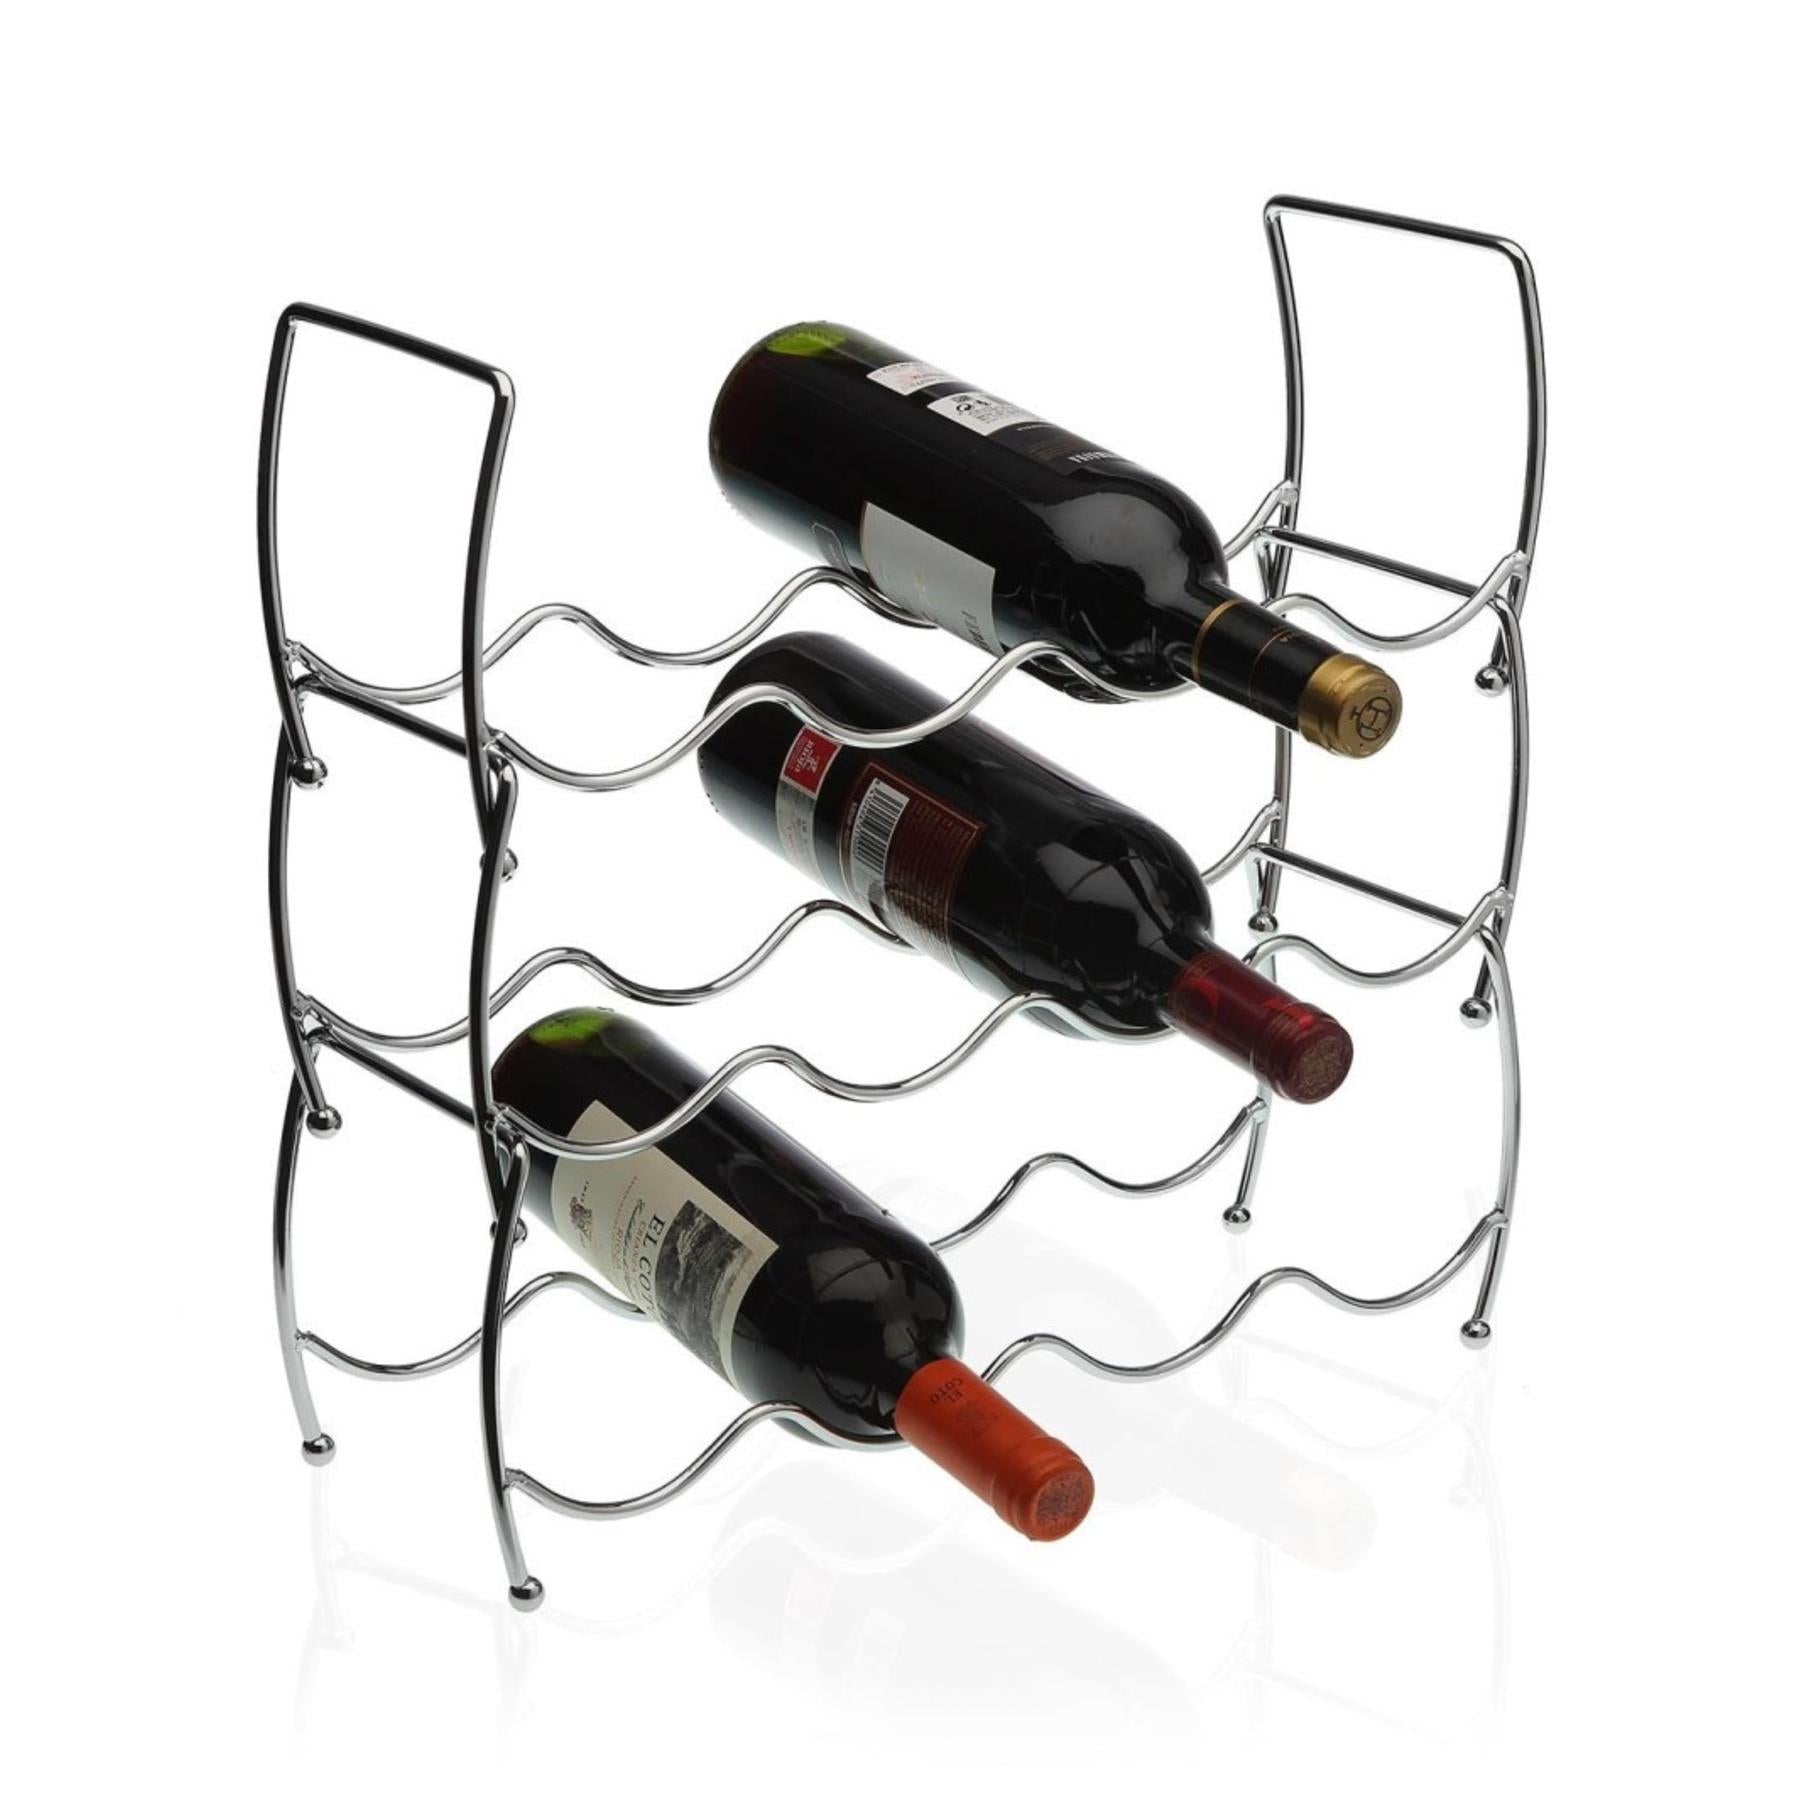 3 Tier Stackable Chrome Wine Storage Display Rack Holder Up To 12 Bottles by MTS - The Magic Toy Shop